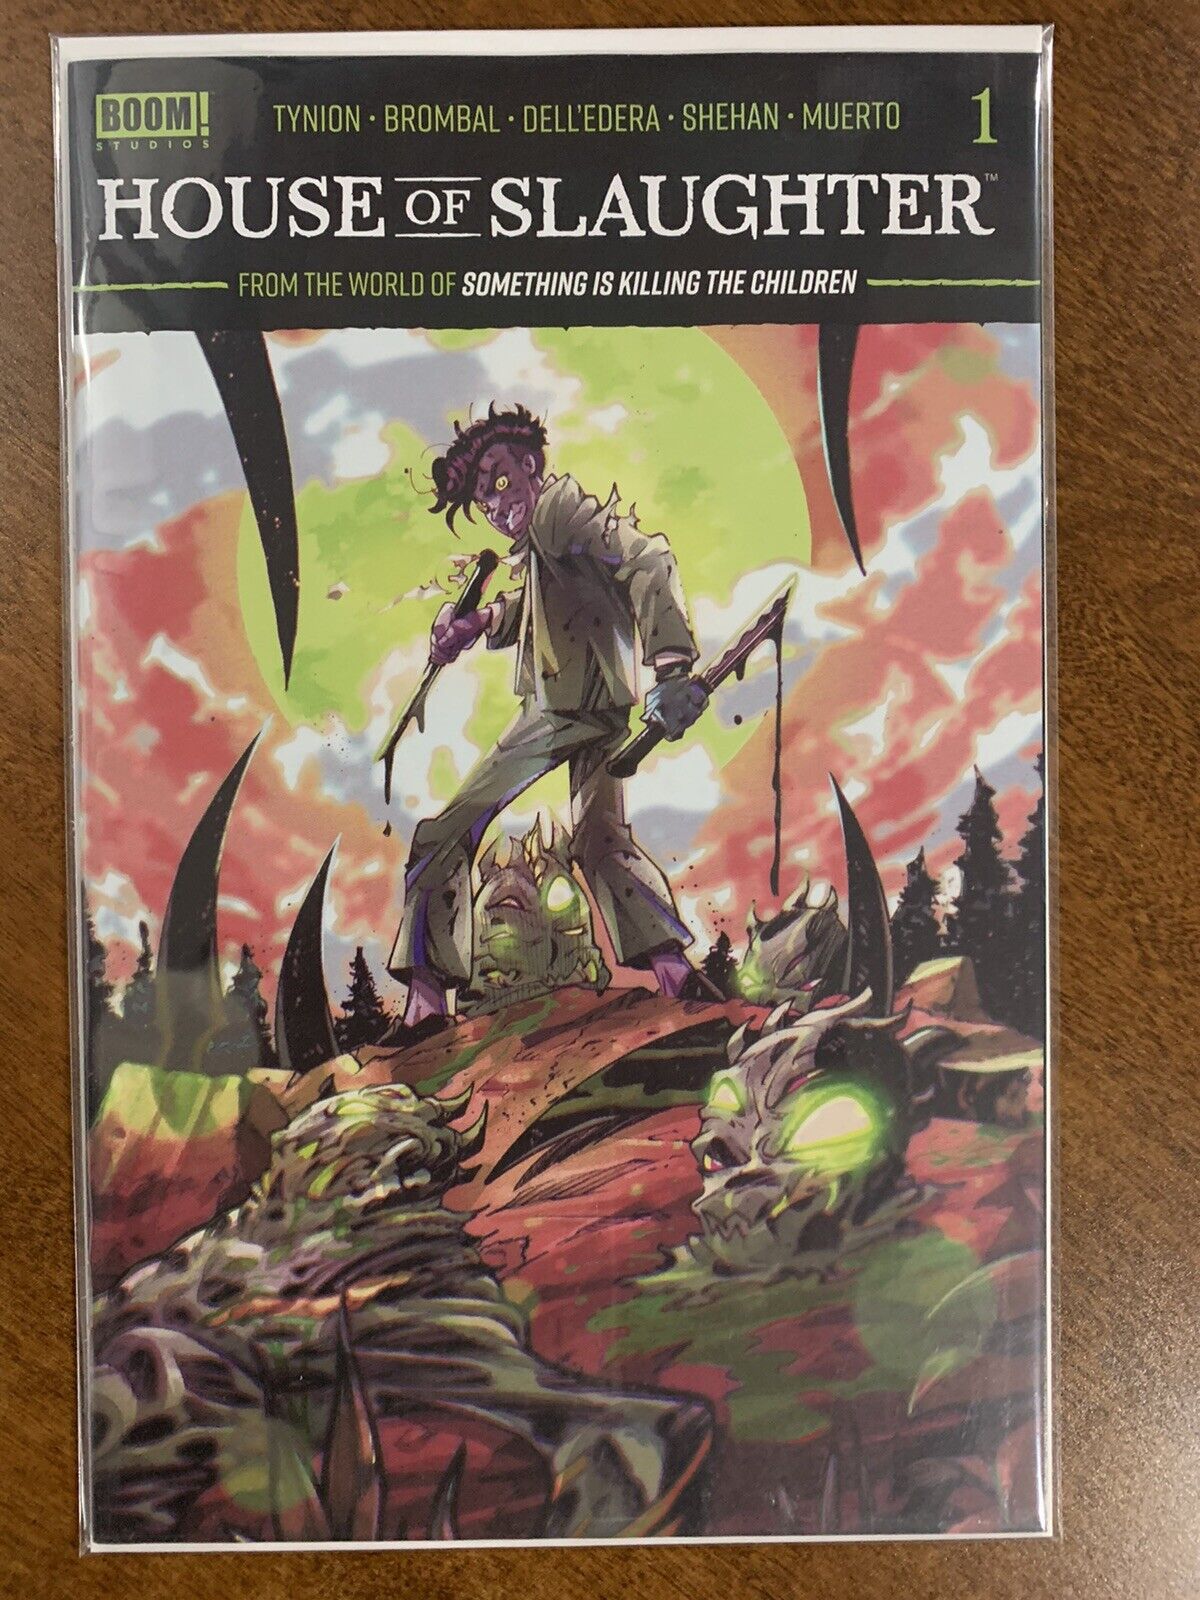 ✨House of Slaughter #1 - Tiny Onion Exclusive Red Founder Tier Variant - RARE